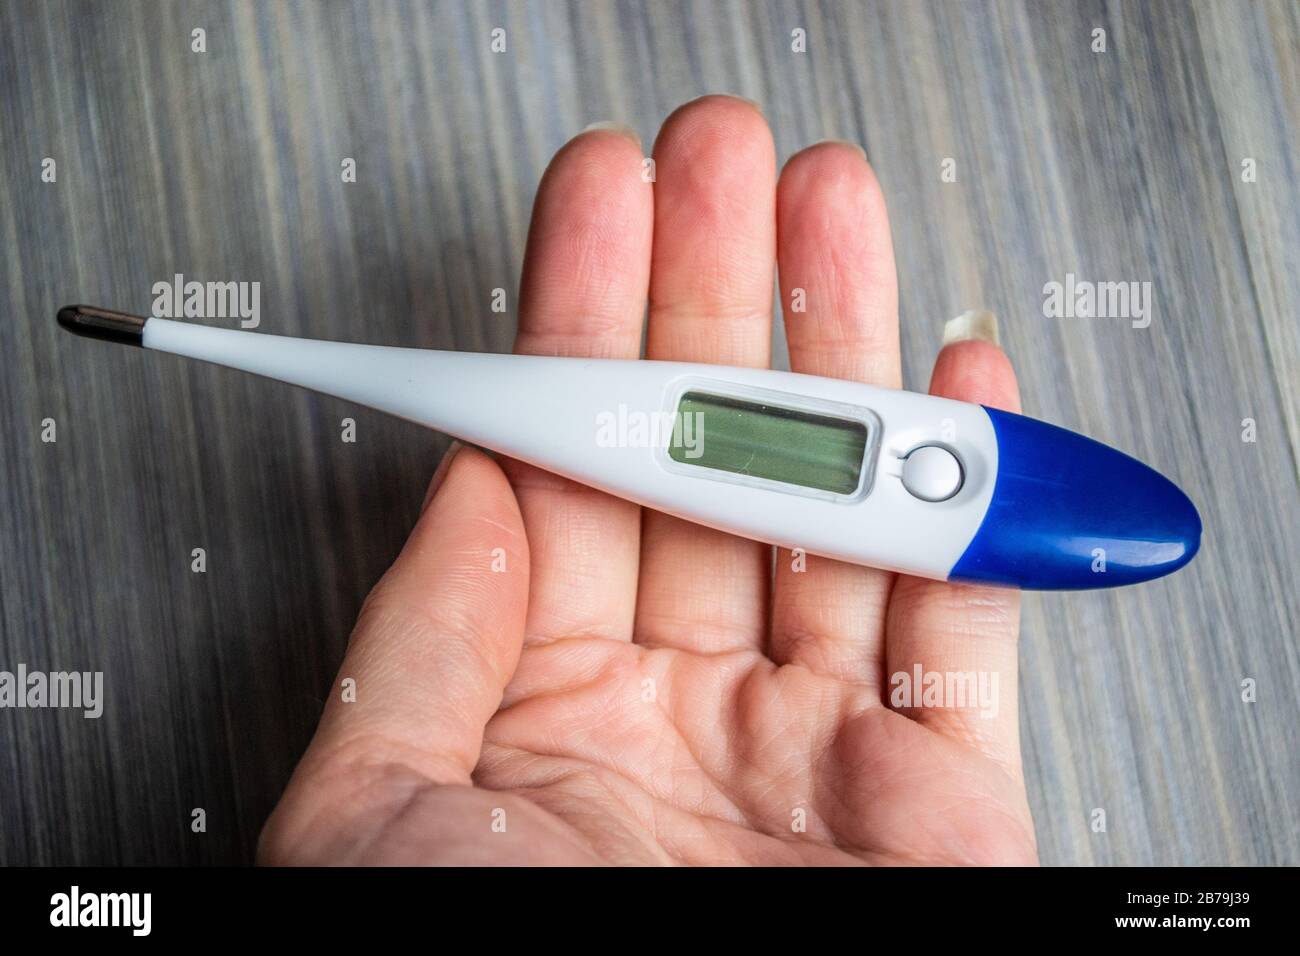 Woman holding a thermometer during the 2020 Coronavirus outbreak Stock Photo